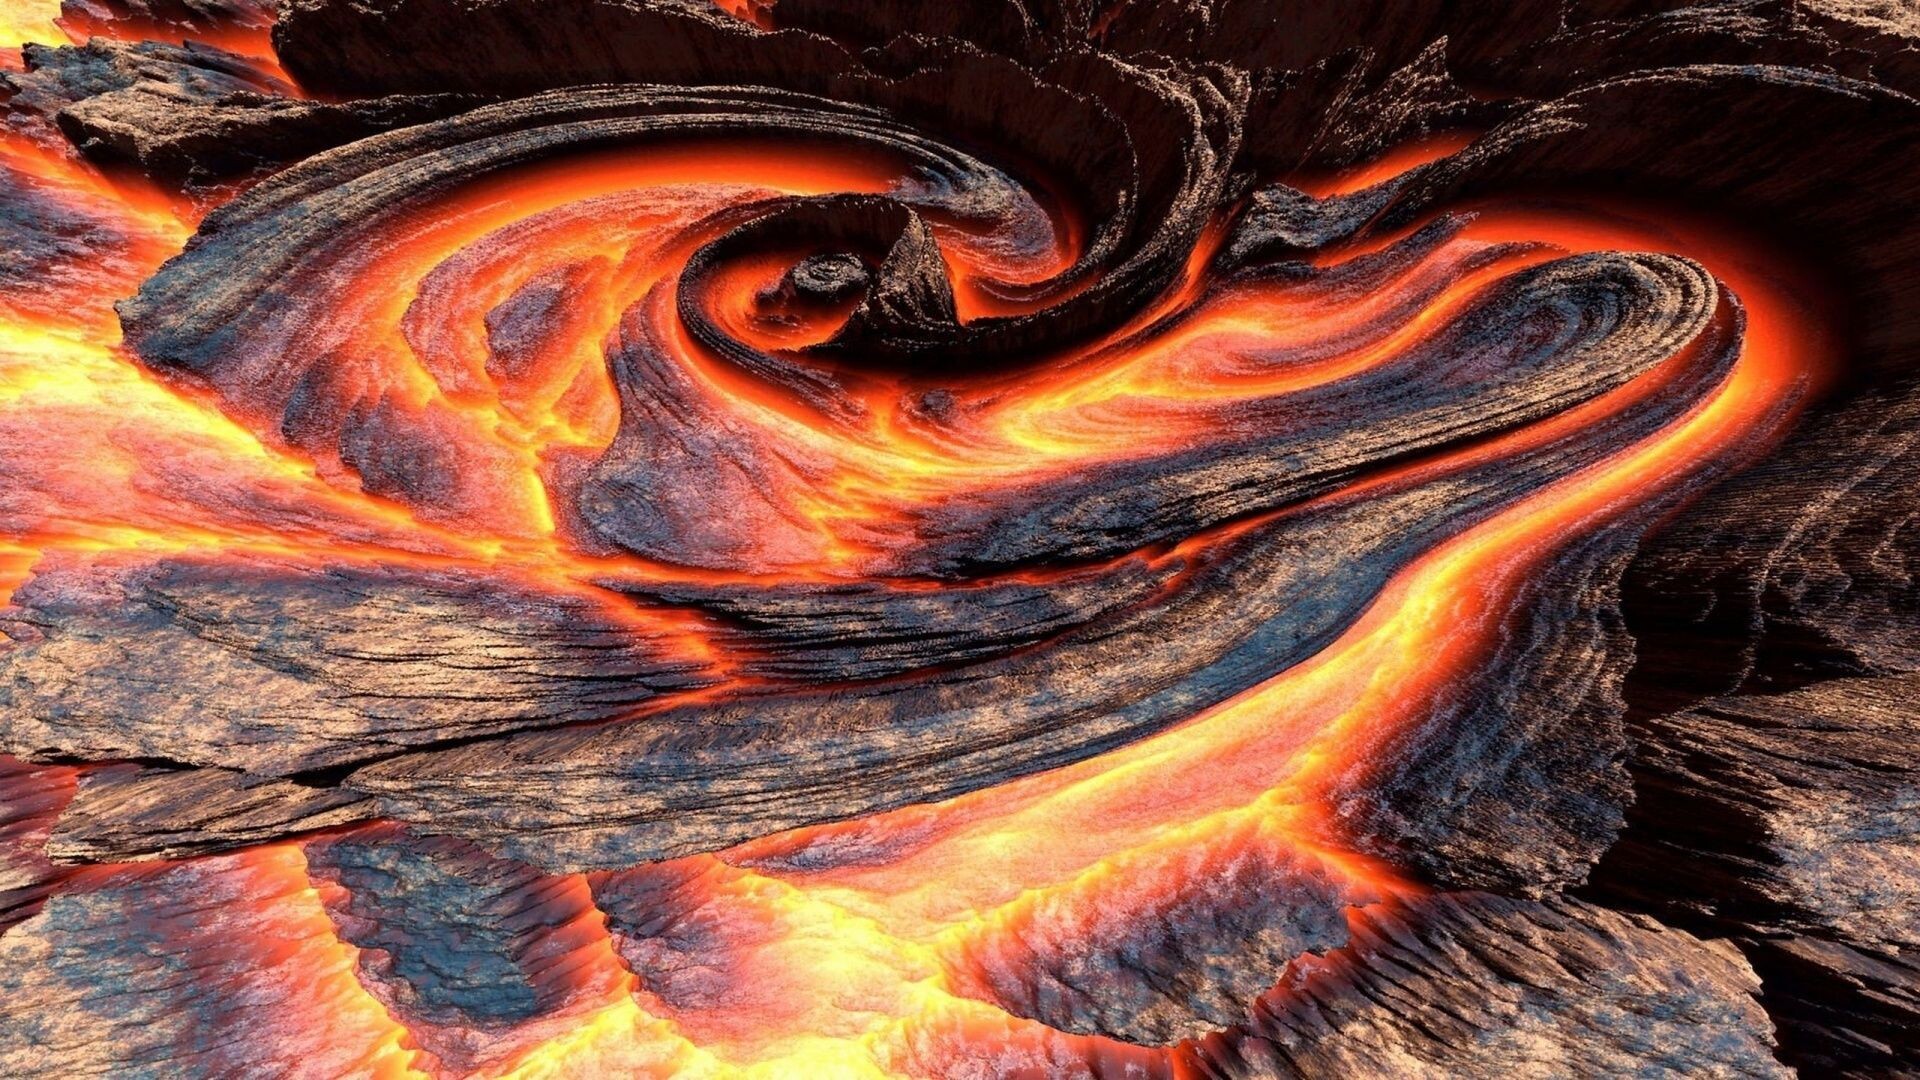 Geology: Molten rock that issues from a volcano, Magma texture, Natural landscape. 1920x1080 Full HD Wallpaper.